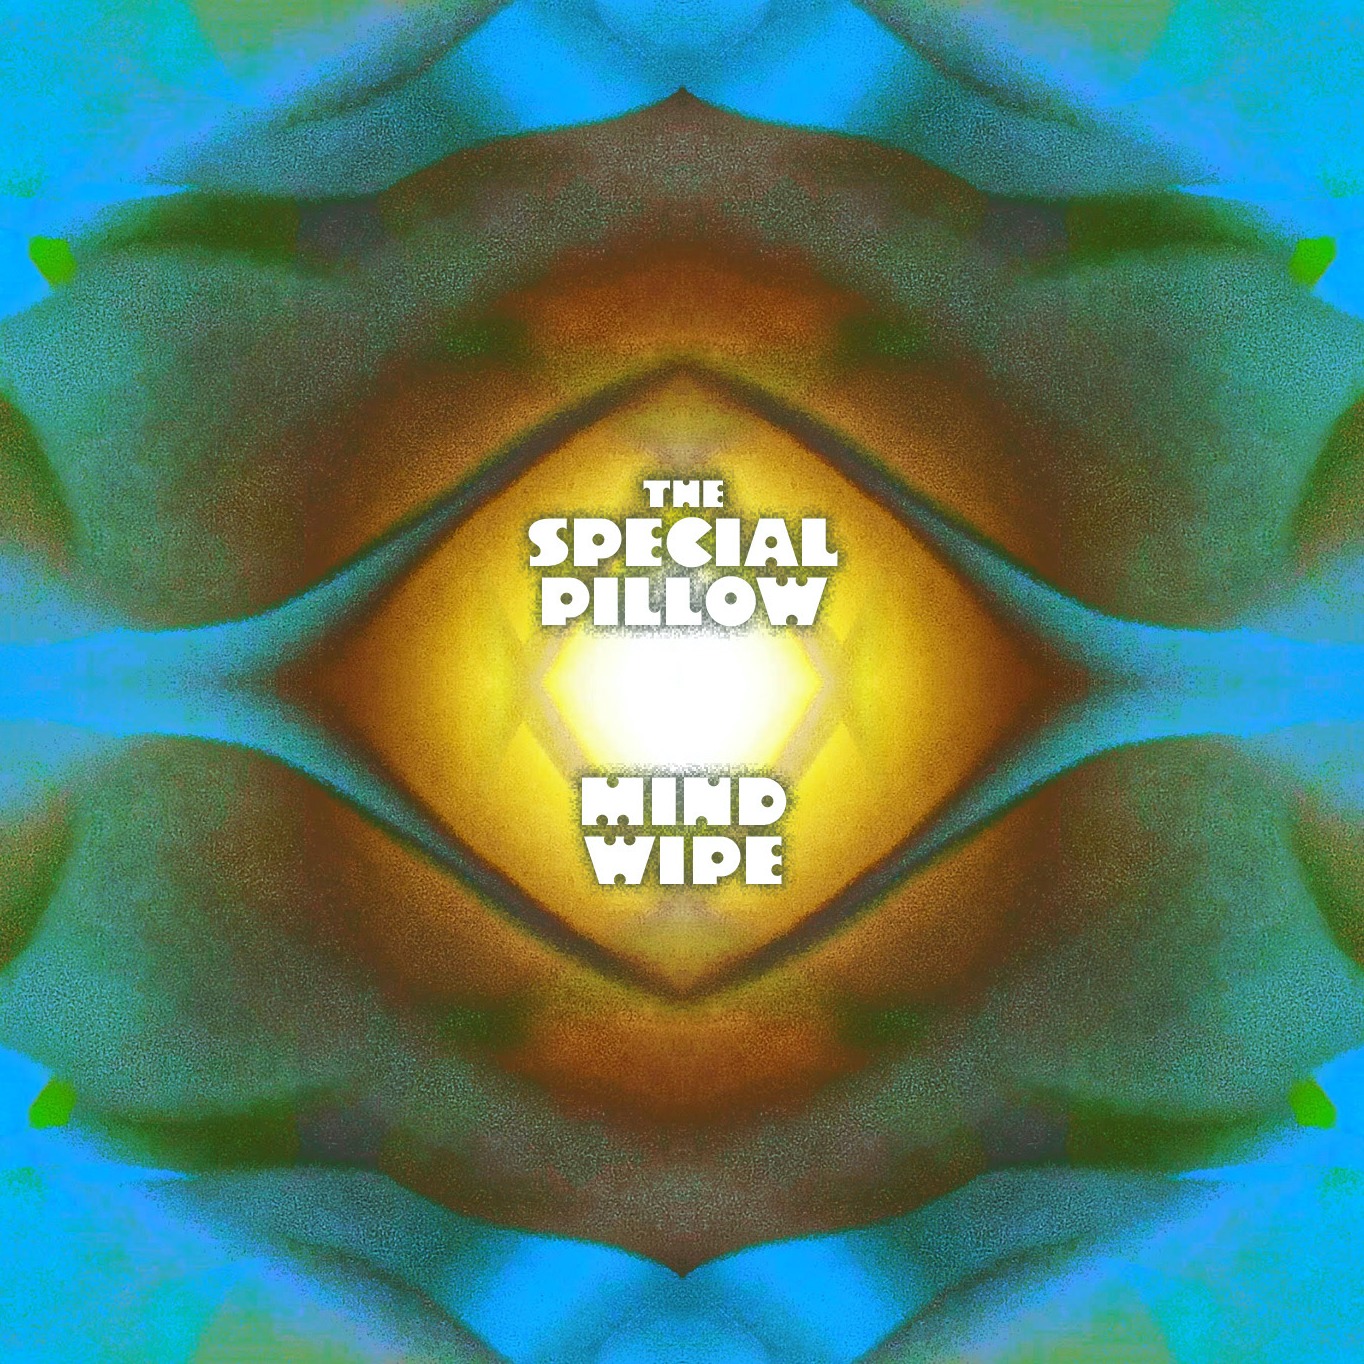 STEREO EMBERS EXCLUSIVE STREAM – New EP “Mind Wipe” from The Special Pillow (ft. ex-members of Hypnolovewheel, Run On, Tryfles et al) with Track-by-Track Rundown by Dan Cuddy